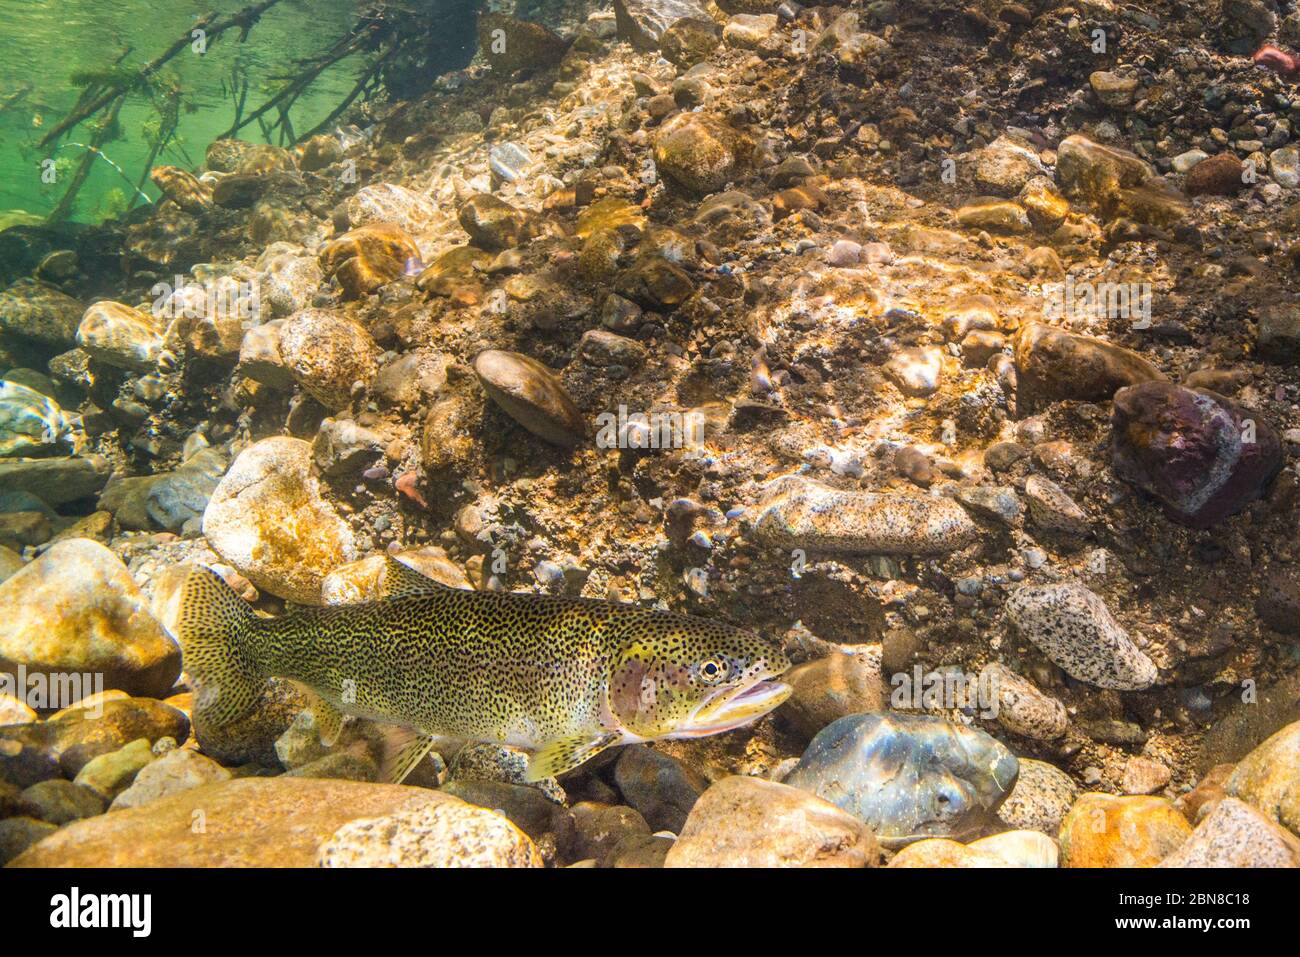 Adult Cutthroat Trout in the clean waters of the Cowichan River, Vancouver Island. Stock Photo